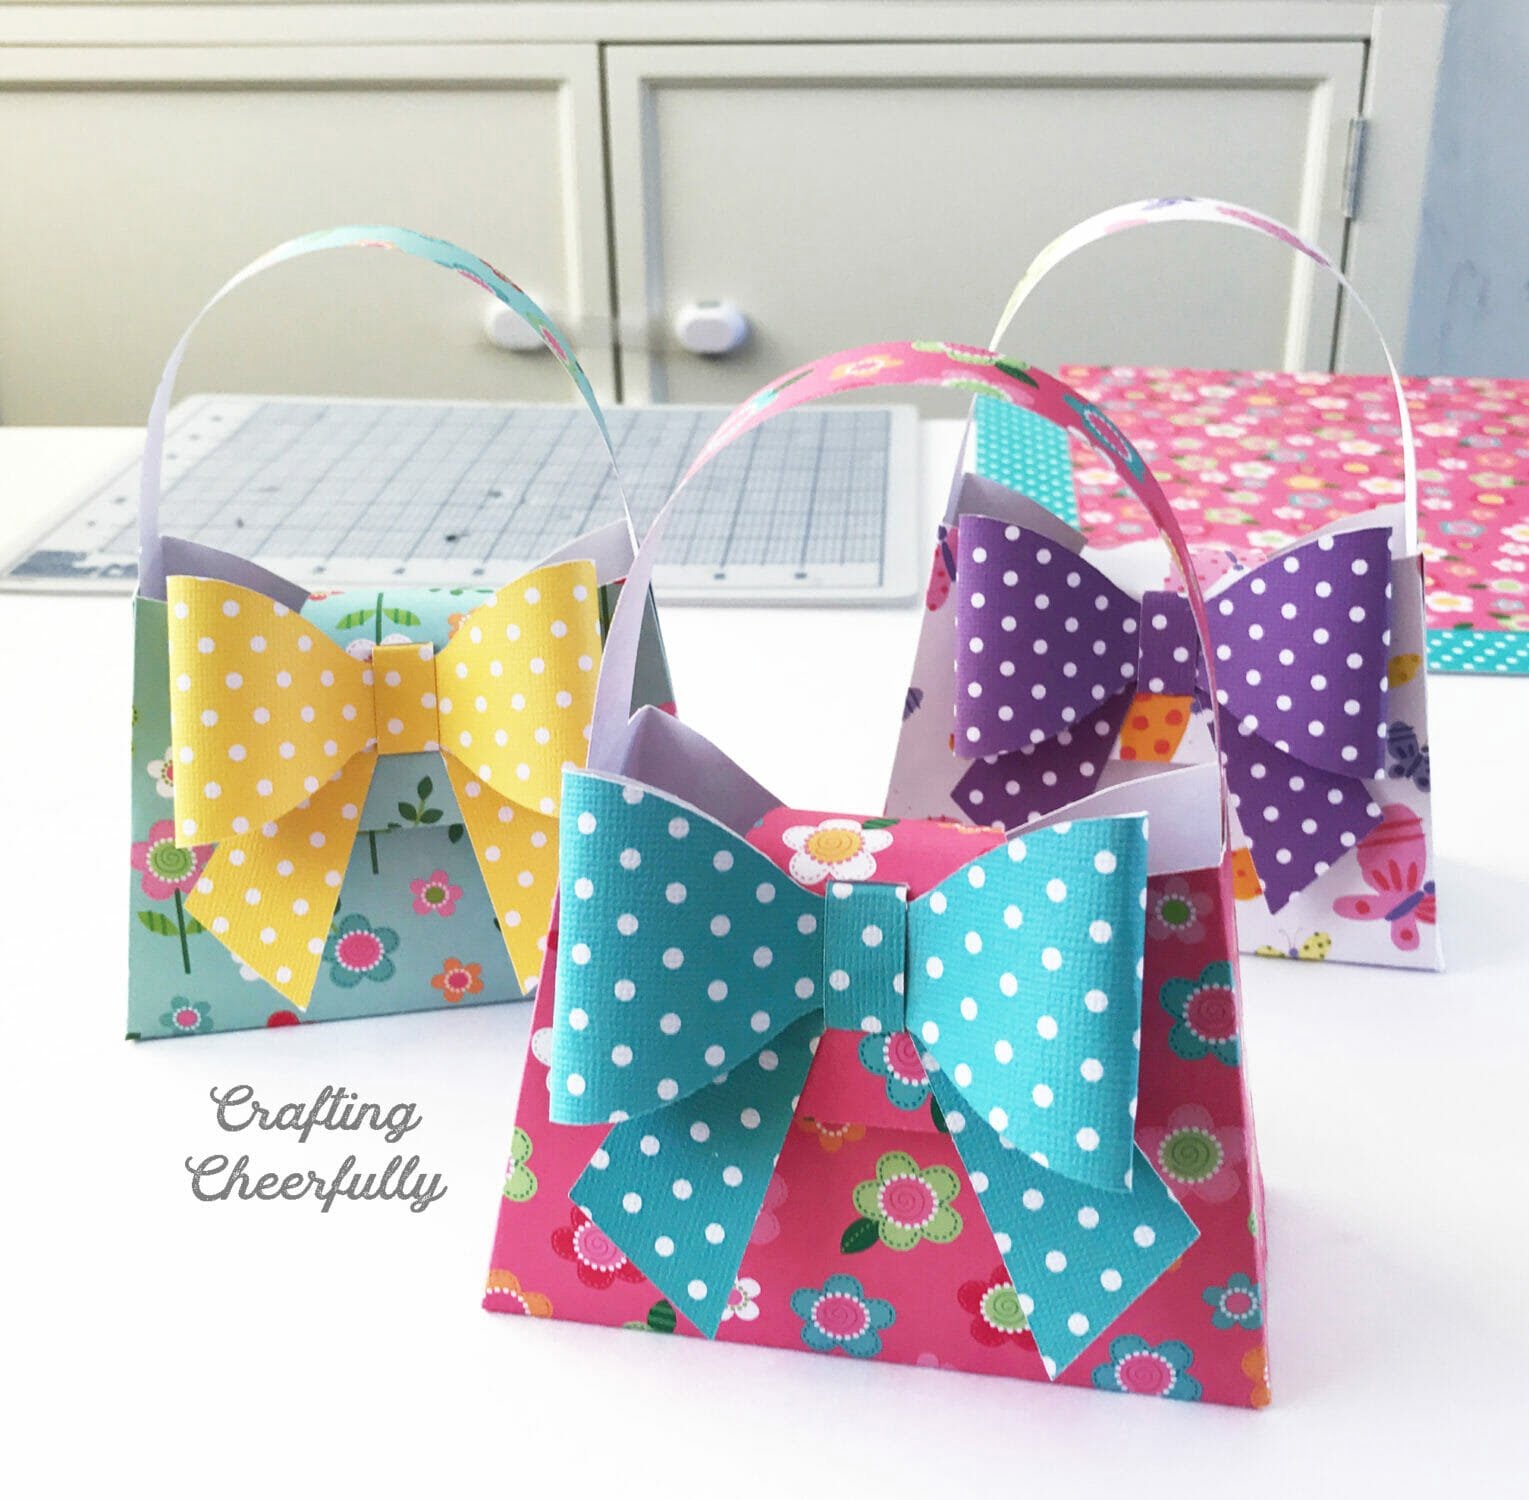 DIY Paper Purse Free Pattern Crafting Cheerfully